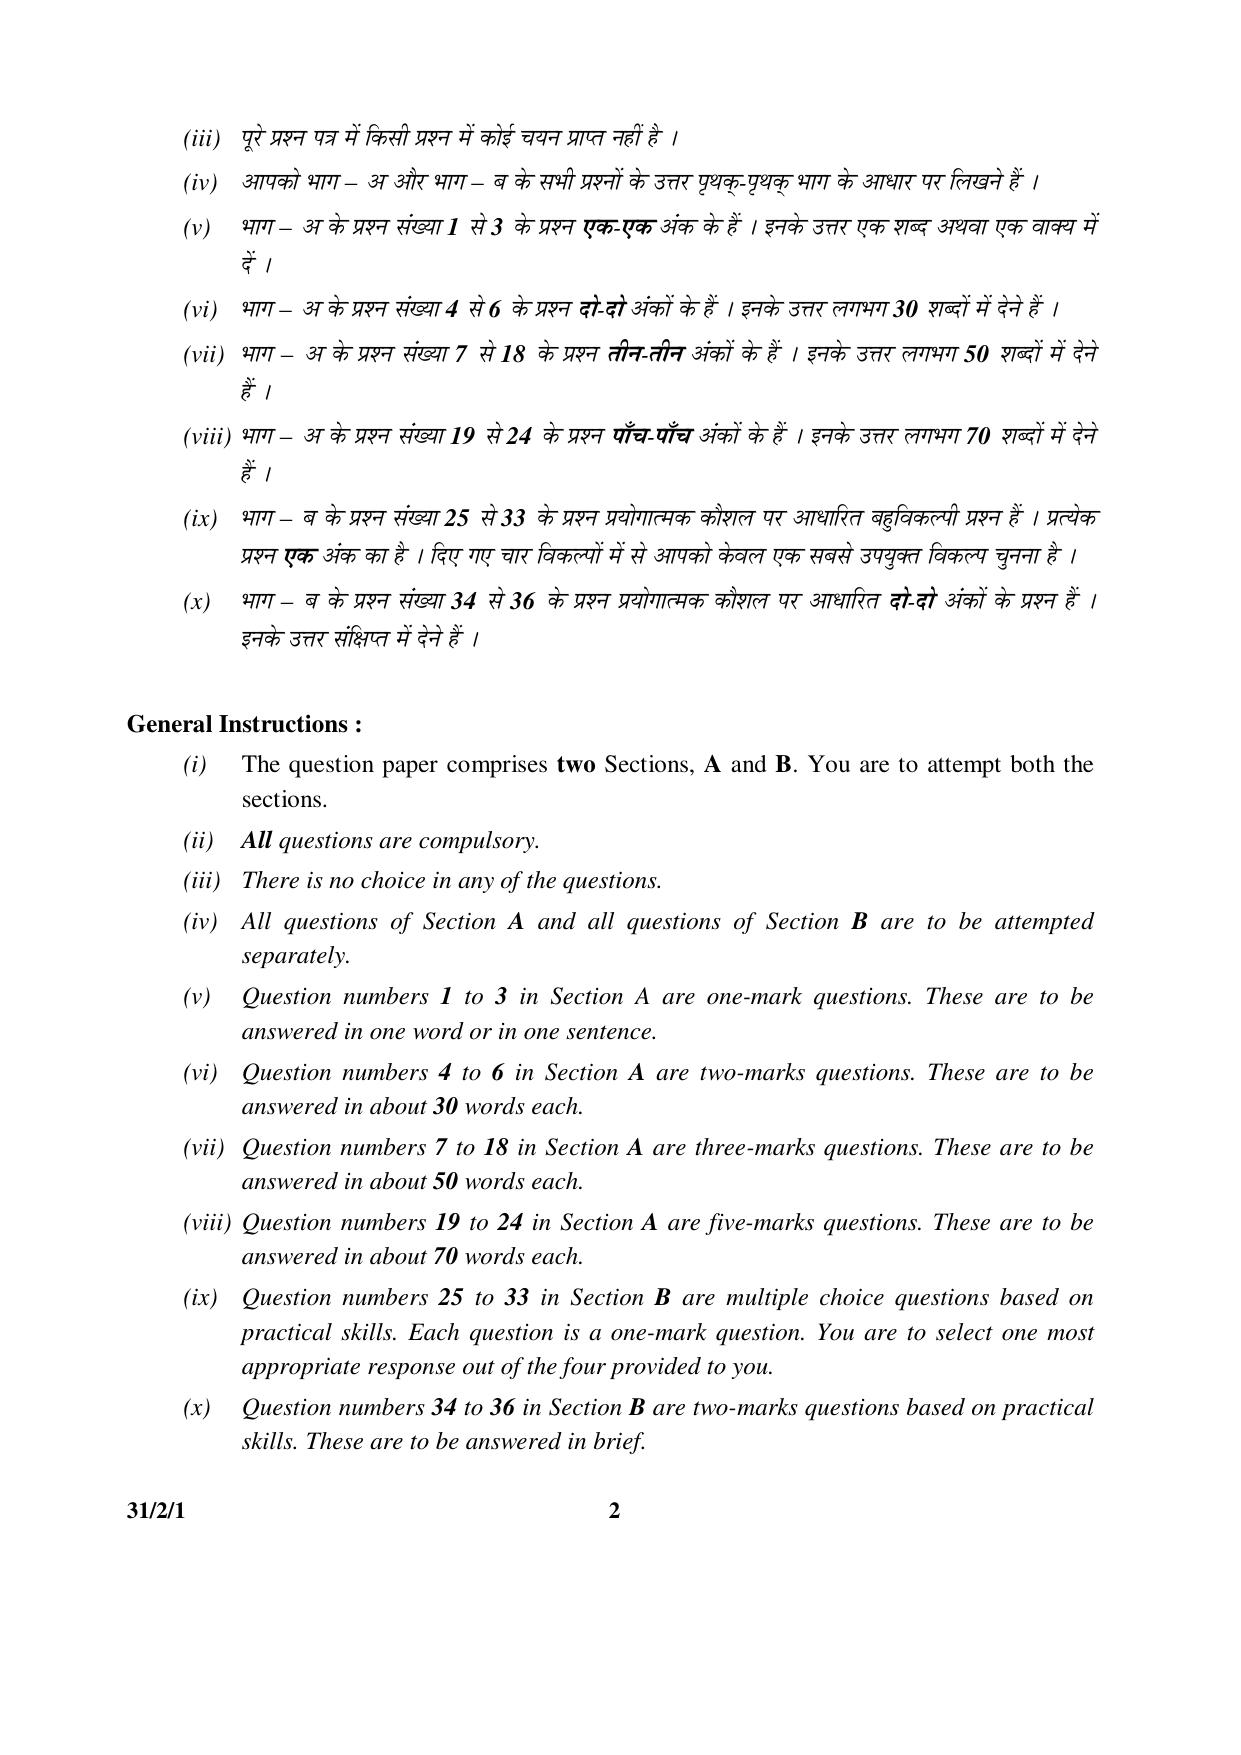 CBSE Class 10 31-2-1 _Science 2016 Question Paper - Page 2